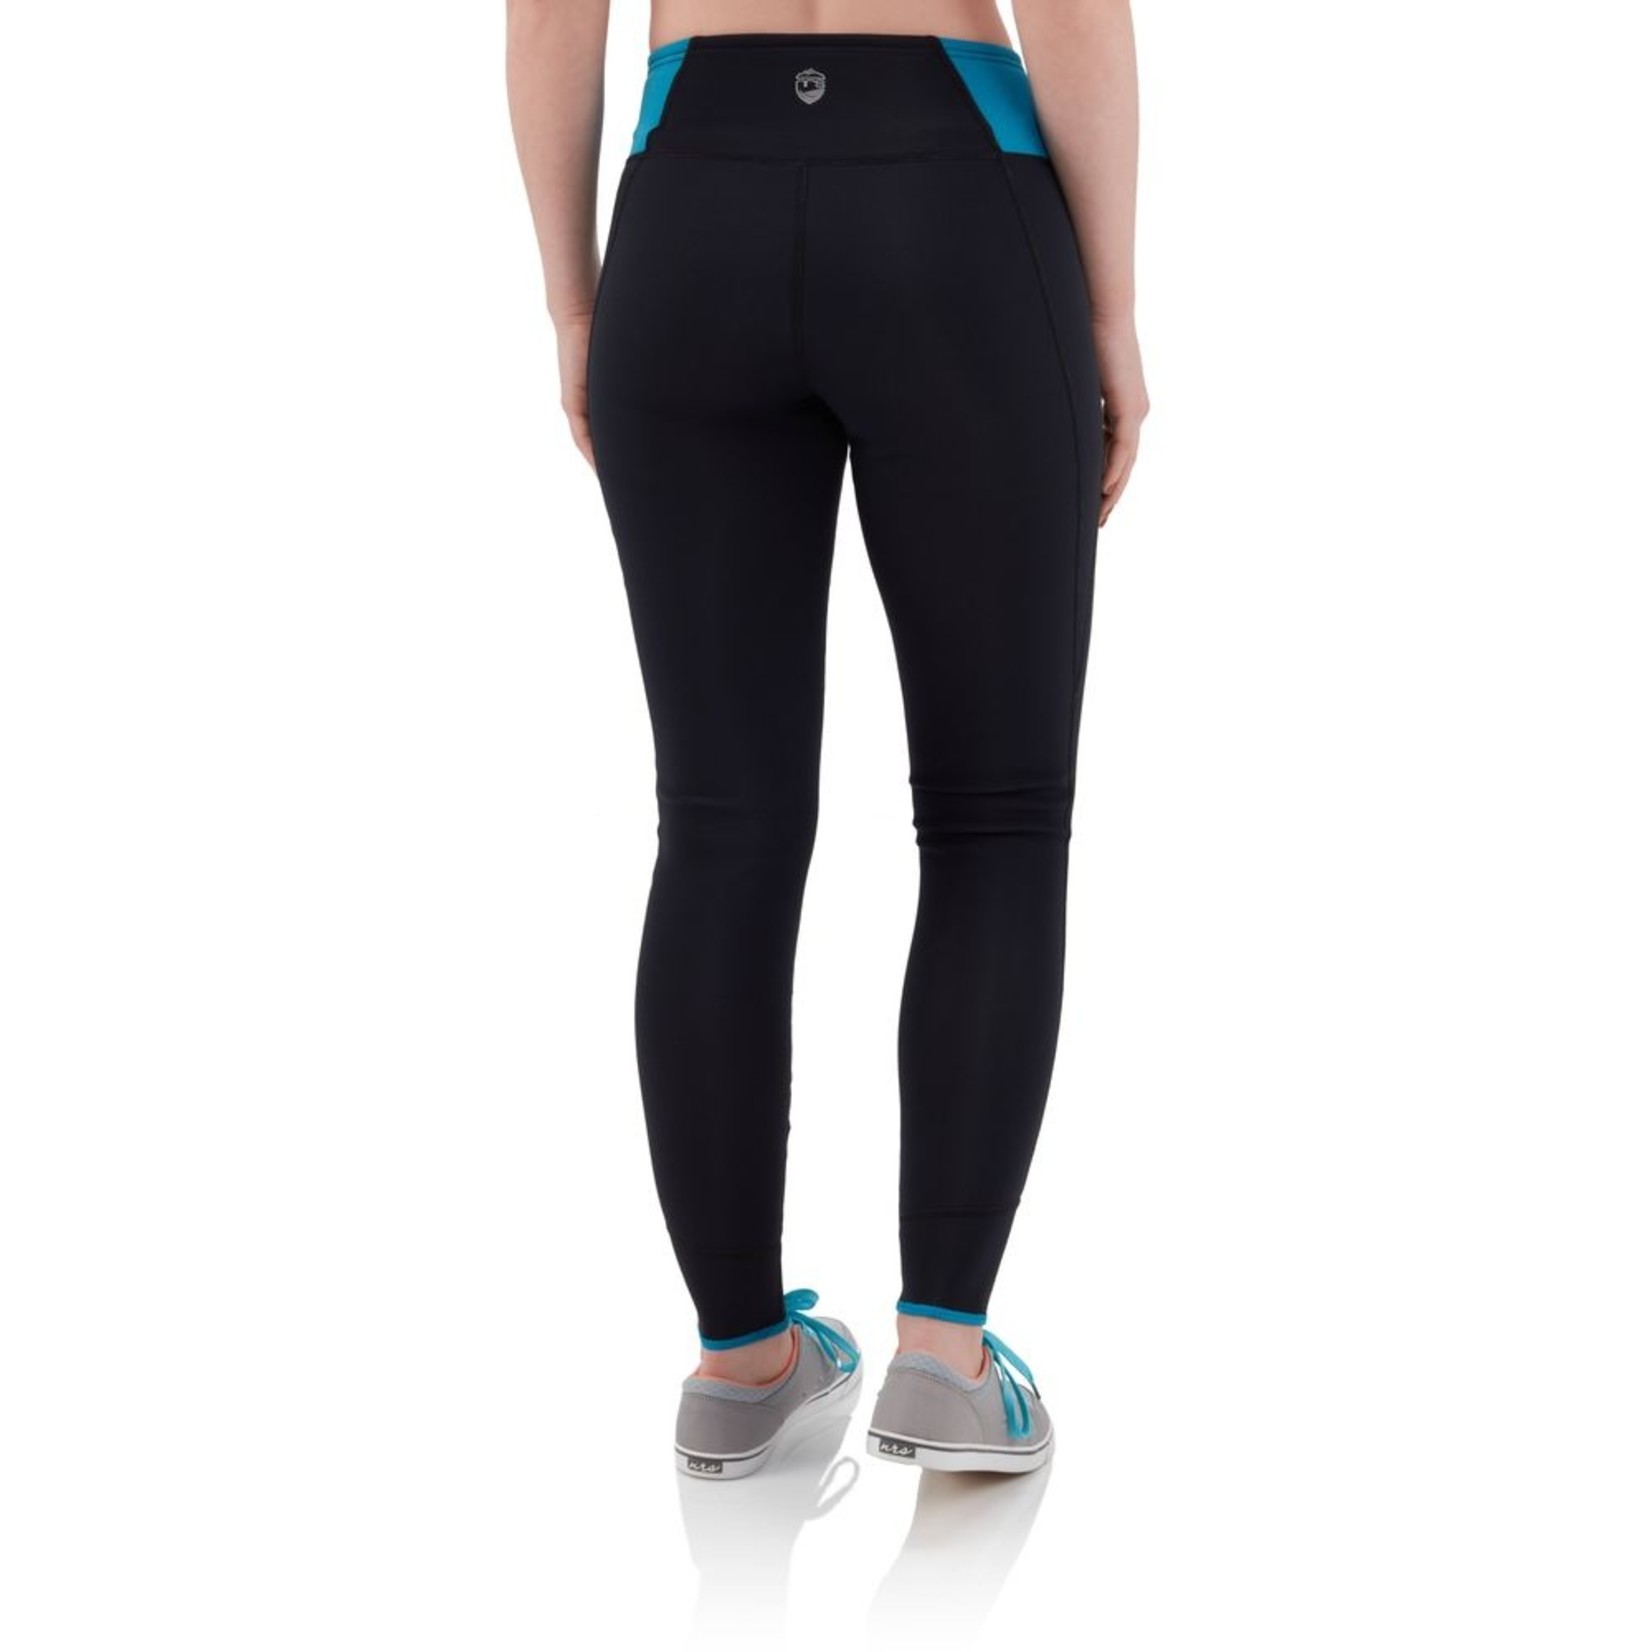 NRS NRS Women's HydroSkin 1.5 Pant